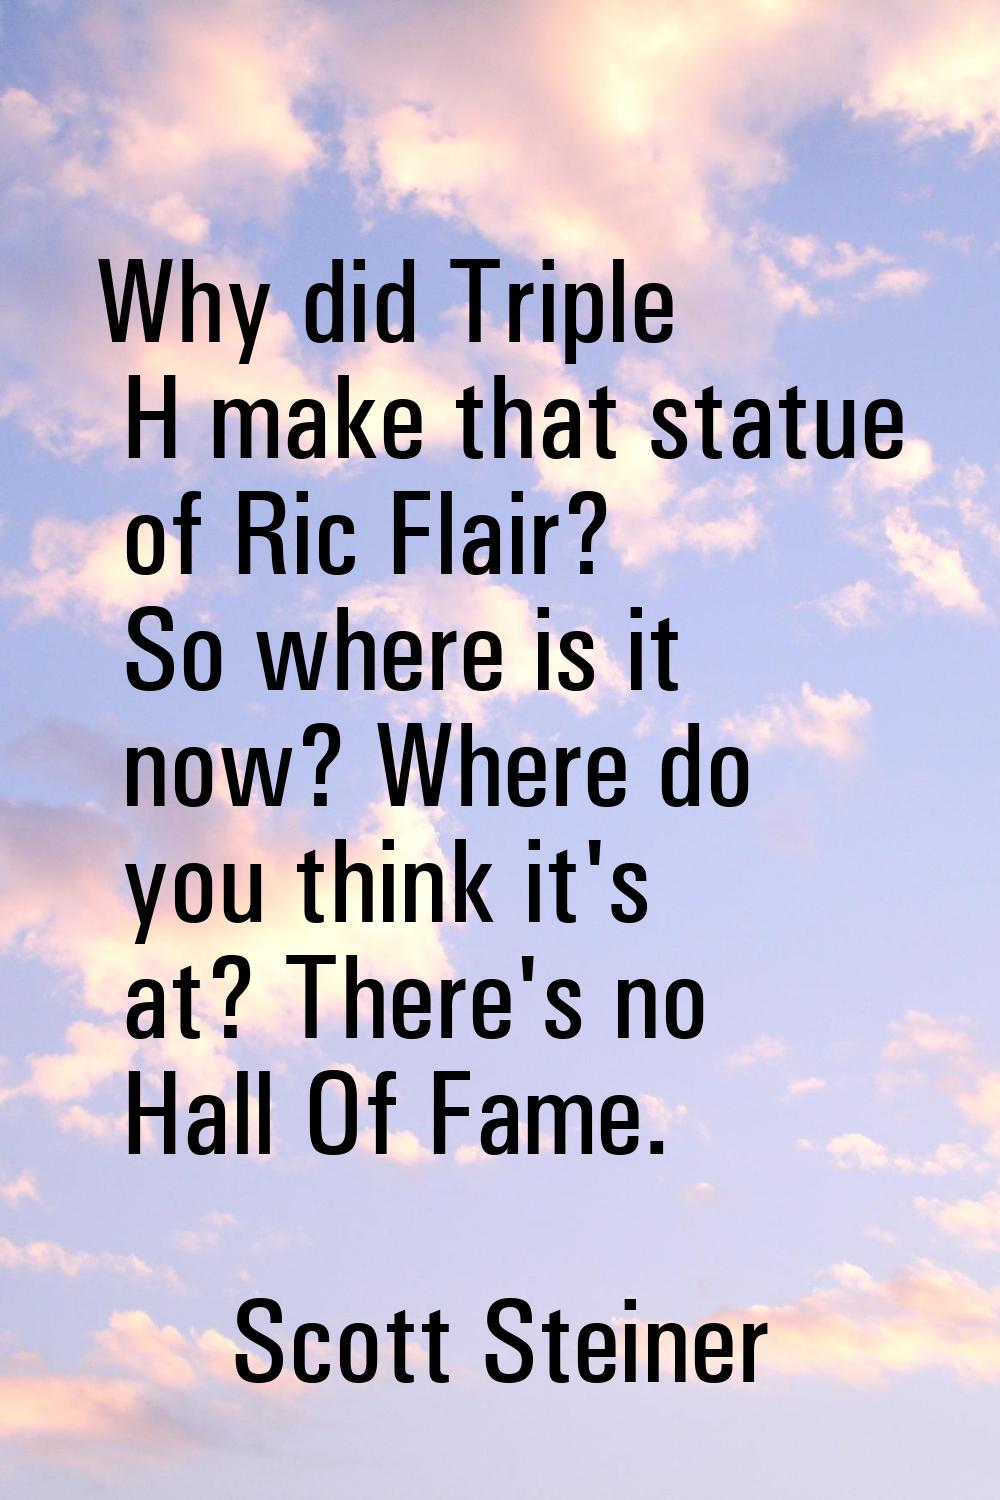 Why did Triple H make that statue of Ric Flair? So where is it now? Where do you think it's at? The